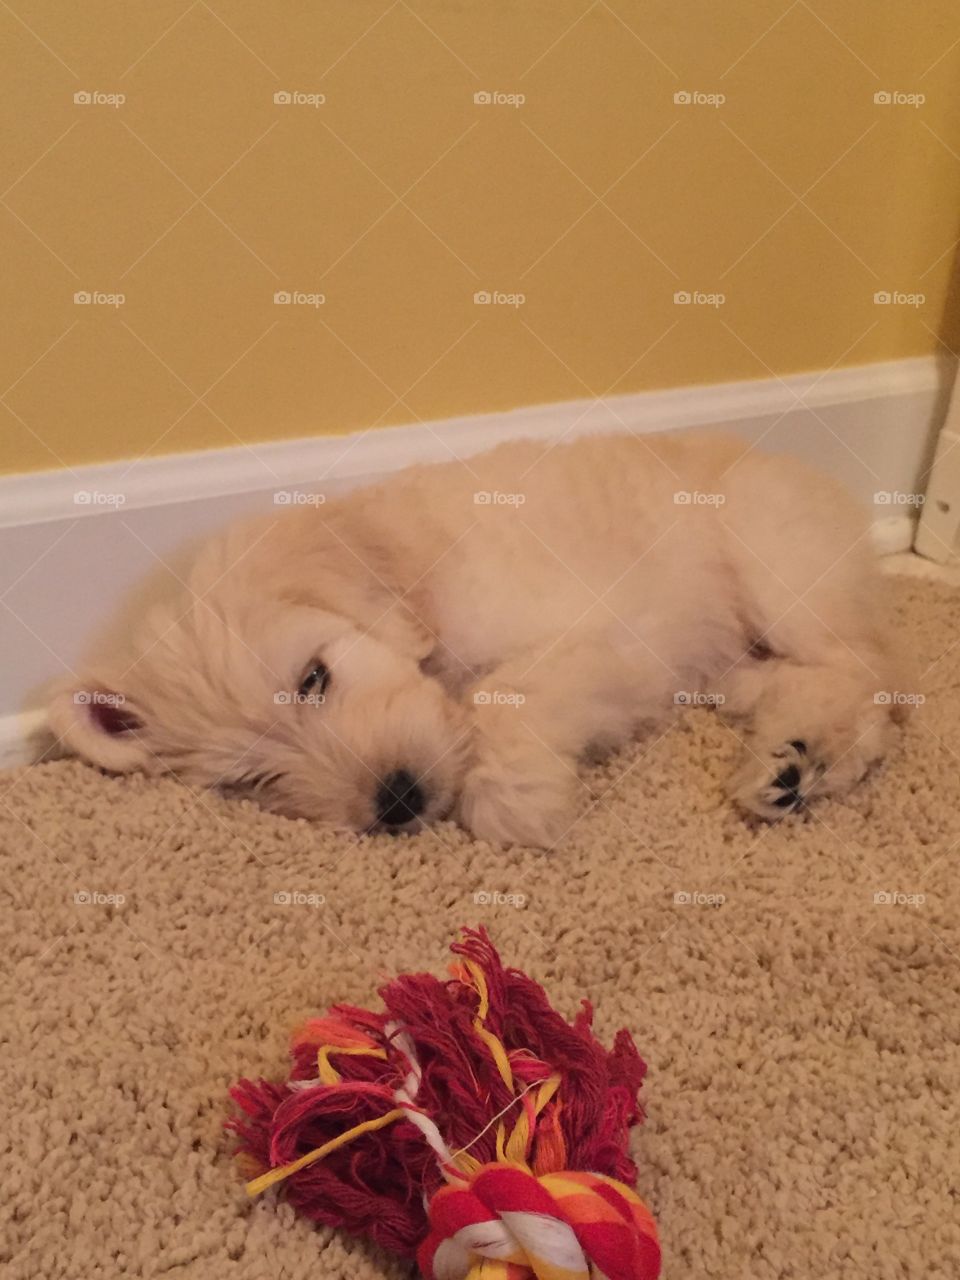 Our new puppy Pippa, about to fall asleep